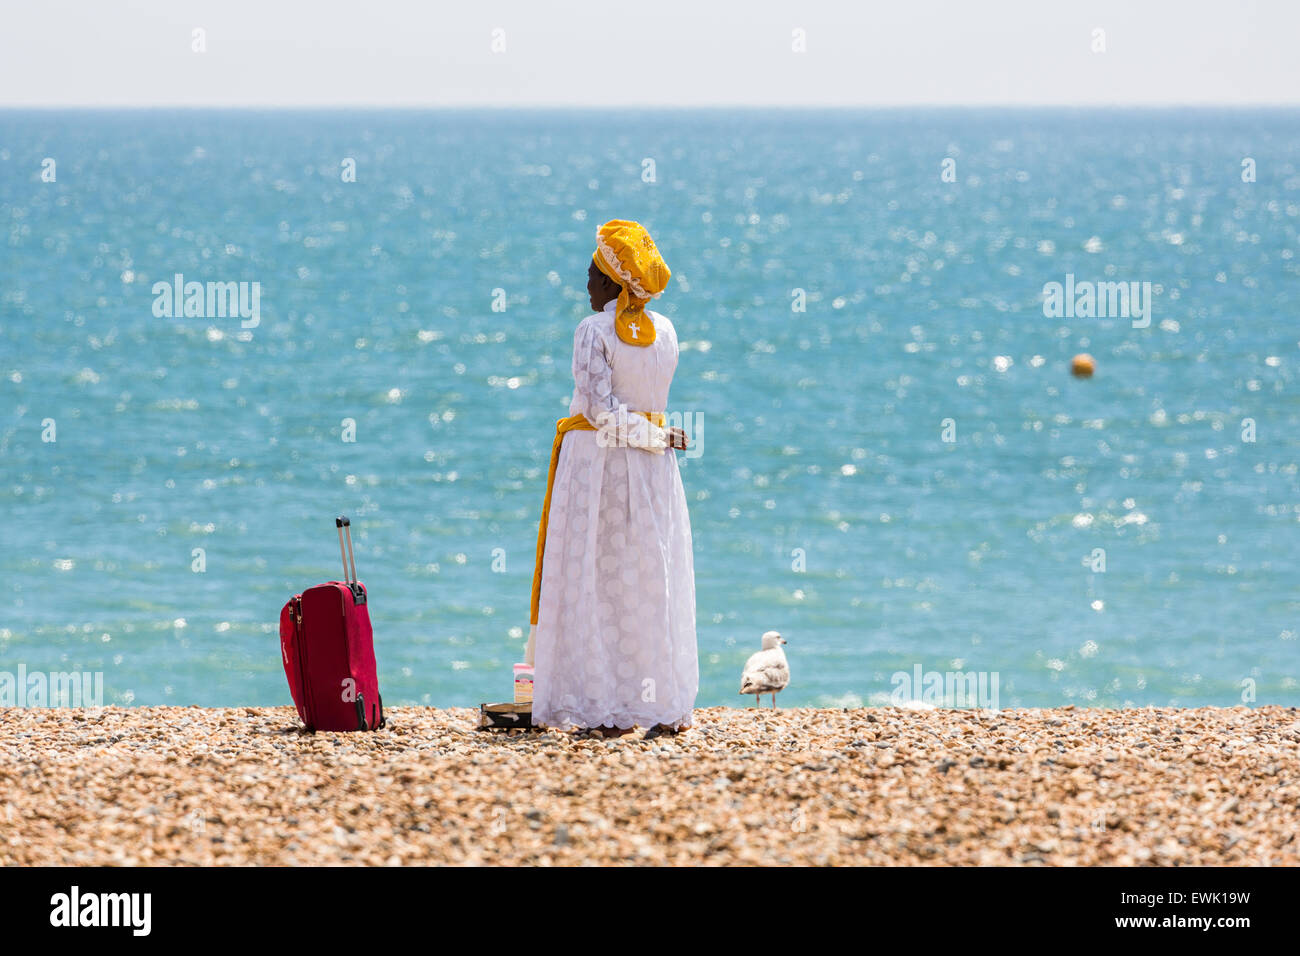 Man in unusual white dress and yellow headwear, with suitcase on the beach in Brighton, East Sussex, UK Stock Photo